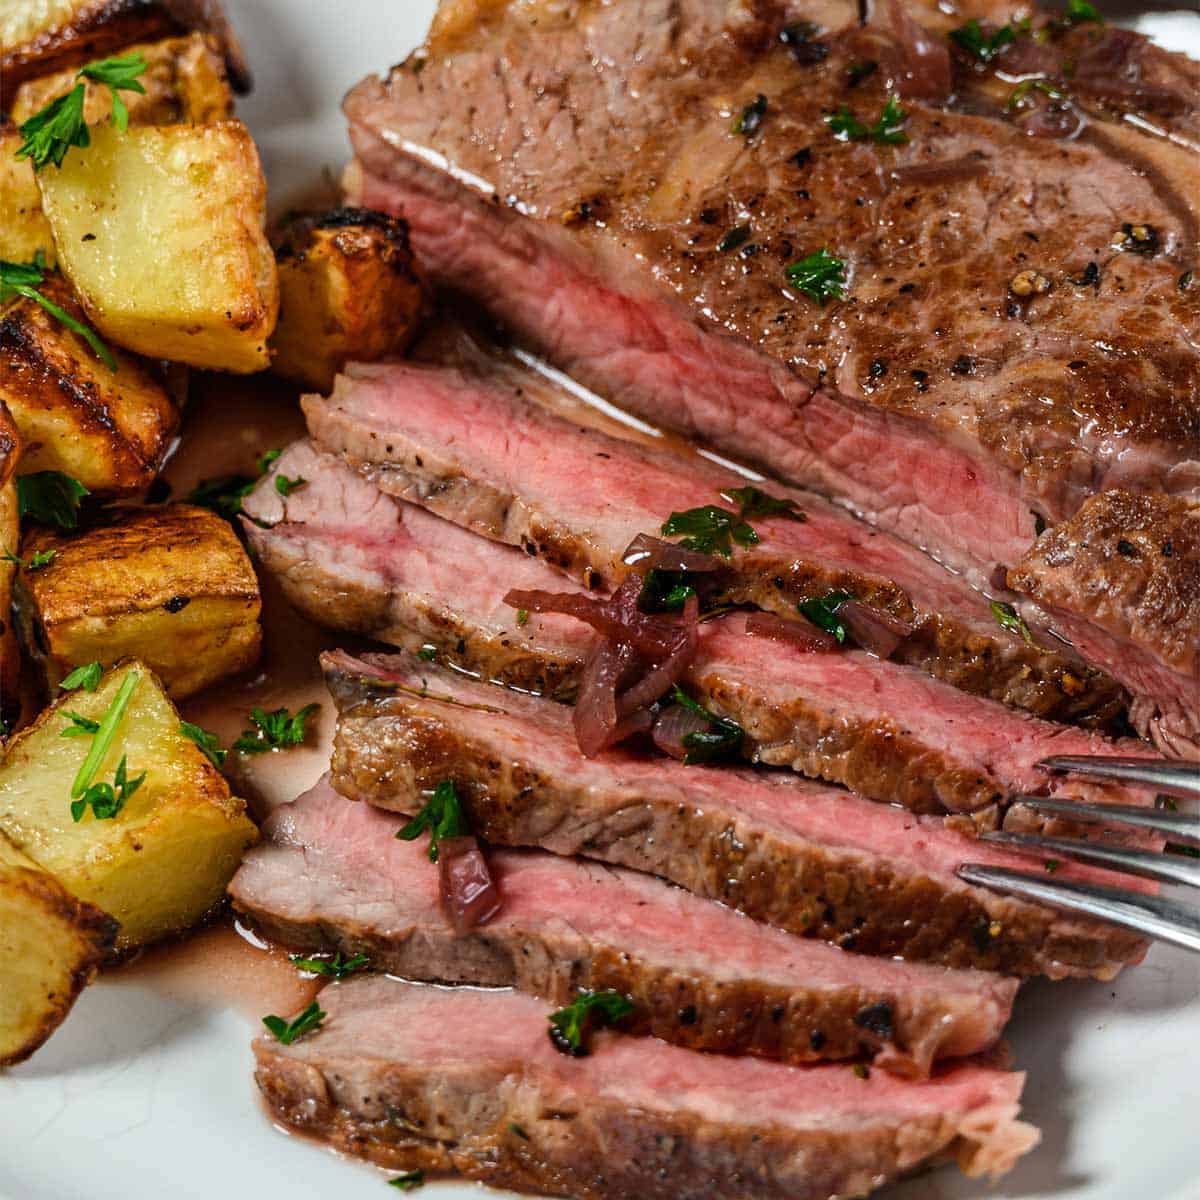 Sliced ribeye on a plate with potatoes up close